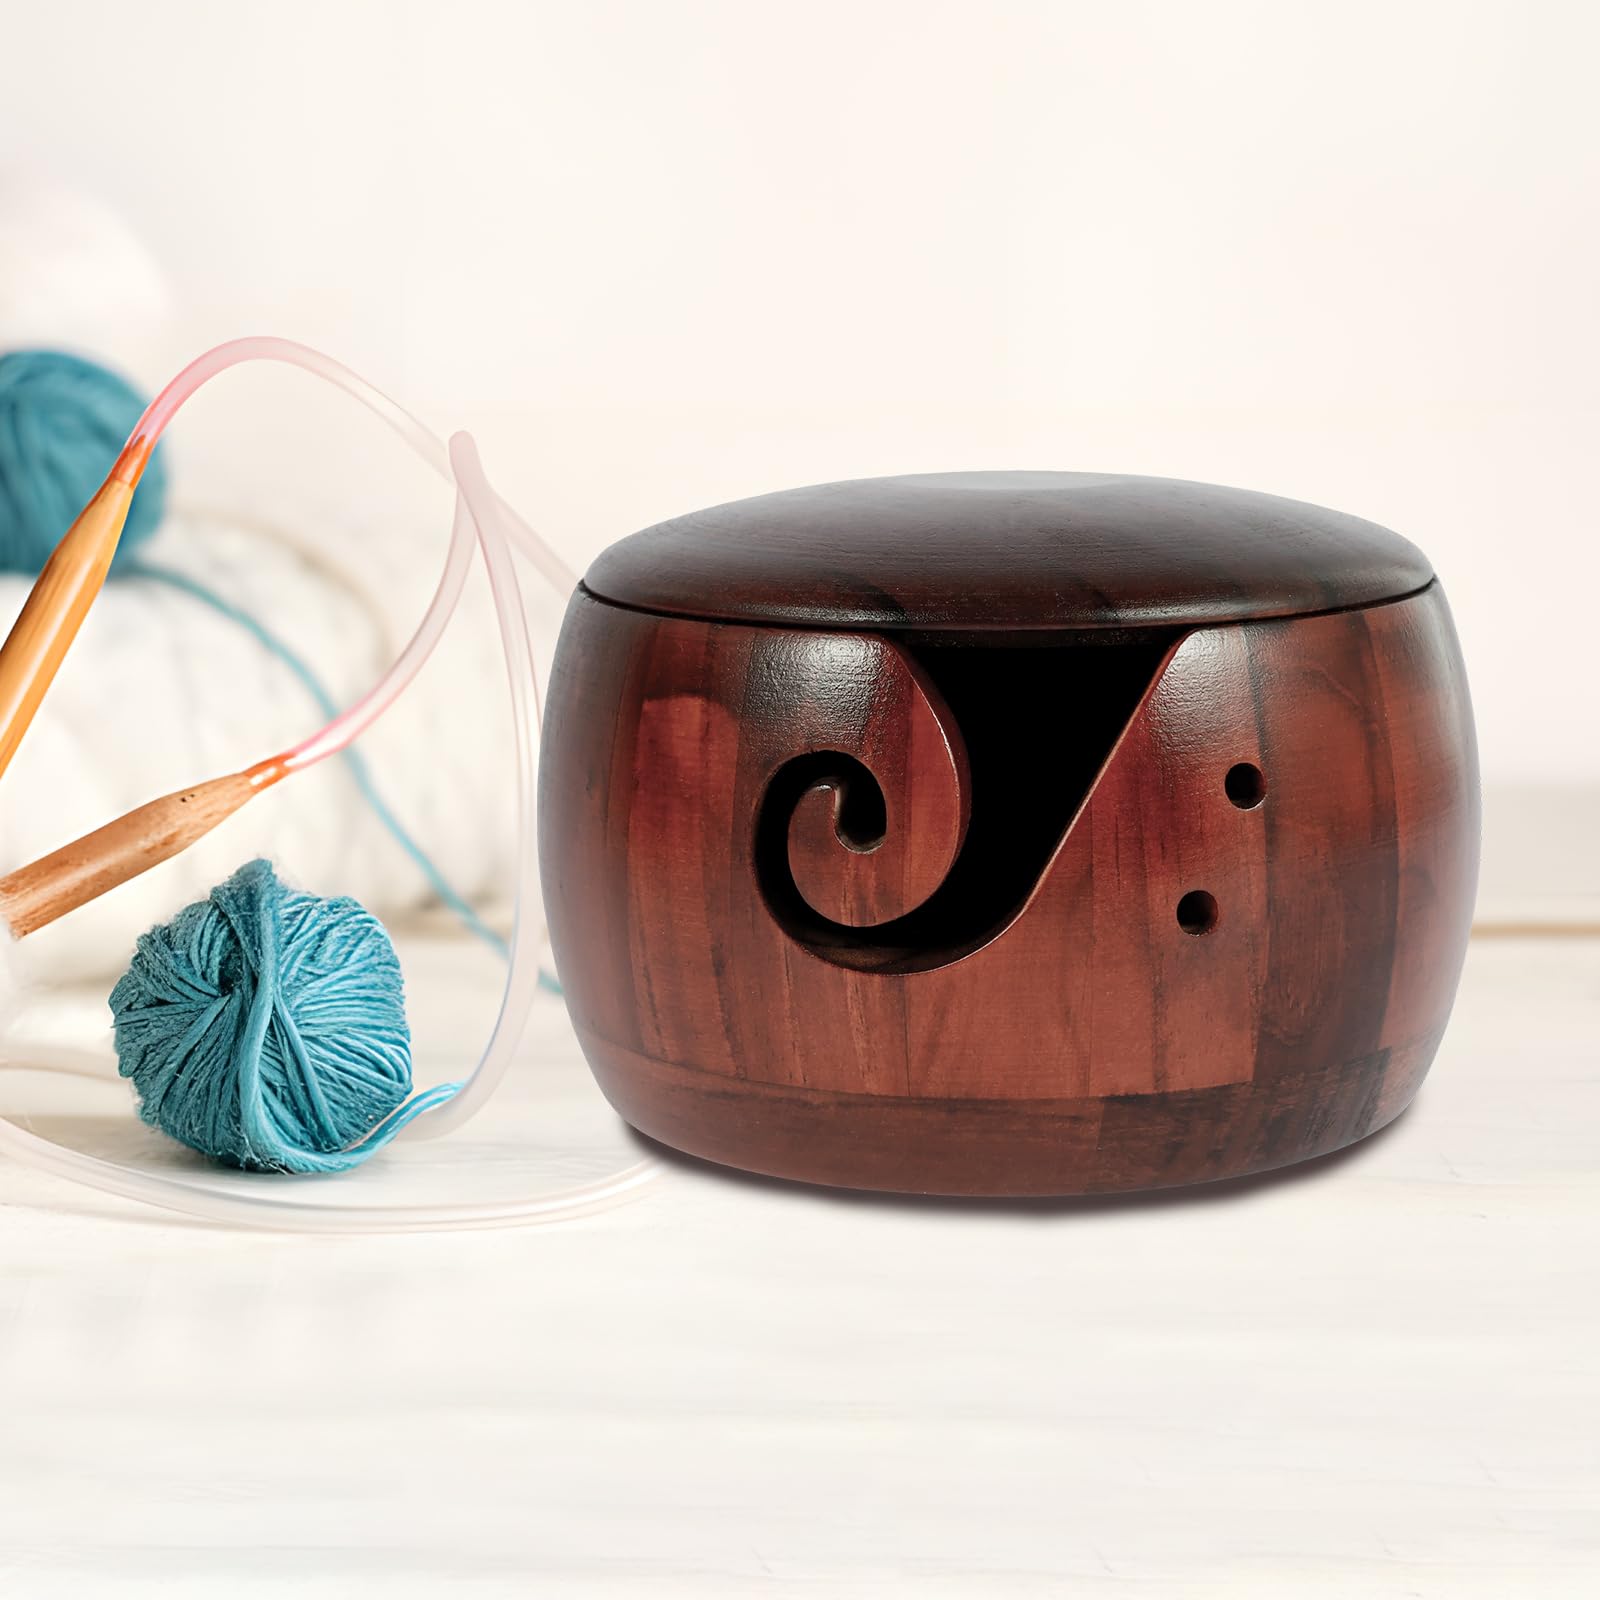 Wooden Yarn Bowl, Knitting Yarn Holder, Pine Crochet Bowl Holder with Lid and Carved Holes, Round Yarn Bowls for Crocheting, Wooden Weaving Thread Bowl, 5.9x5.9x3inch Yarn Storage Bowl for DIY Crafts